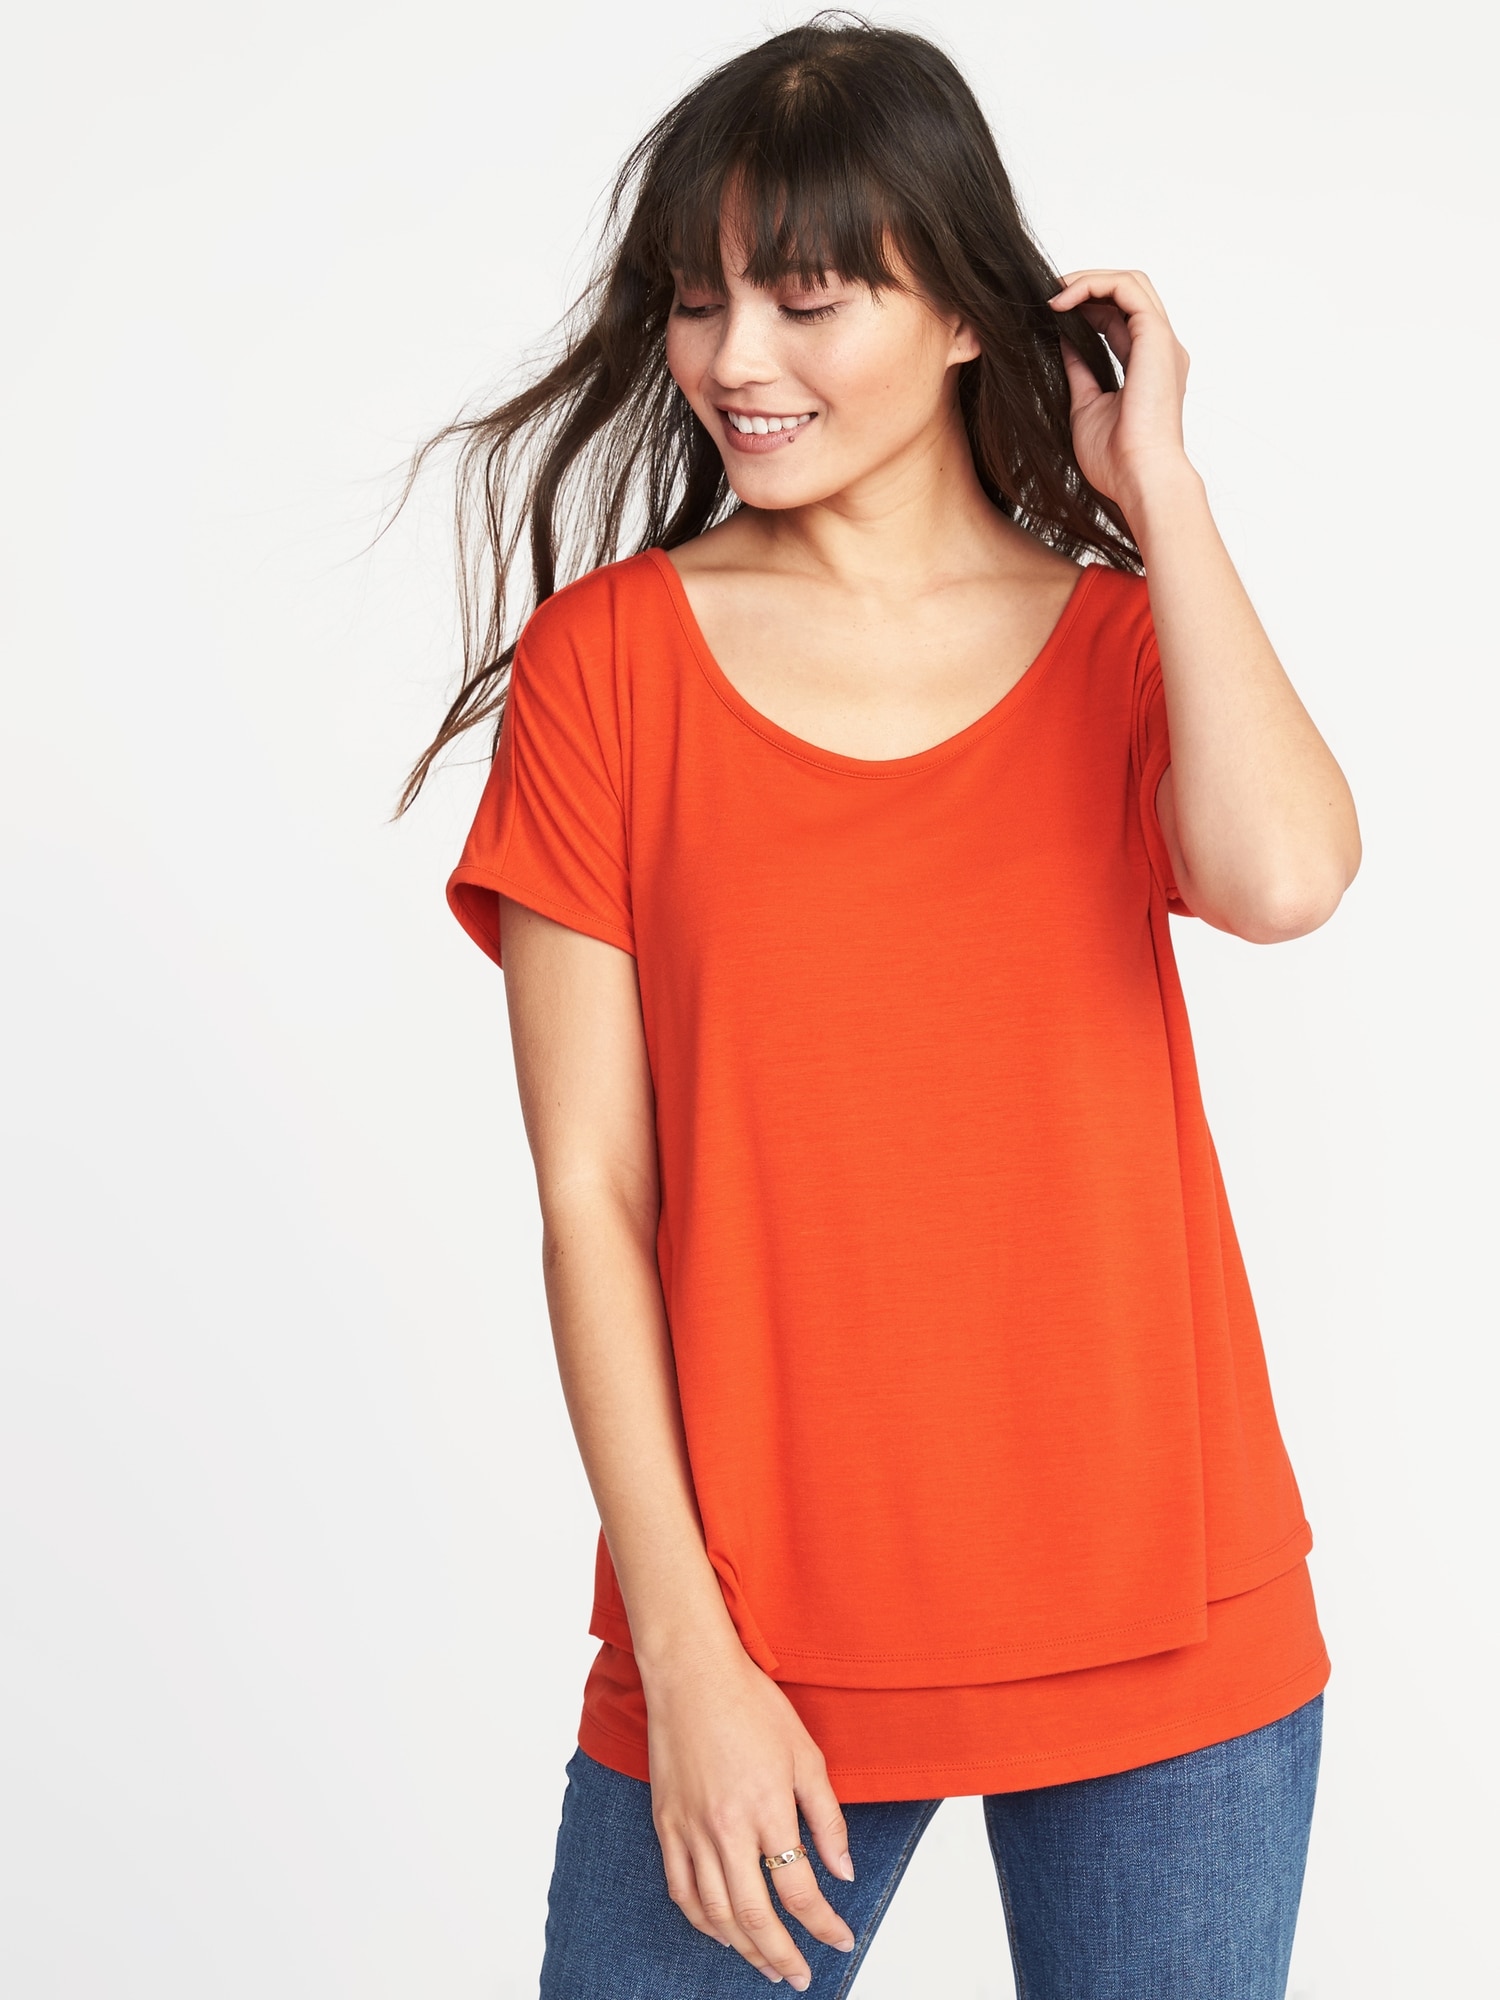 Maternity Double-Layer Nursing Top | Old Navy